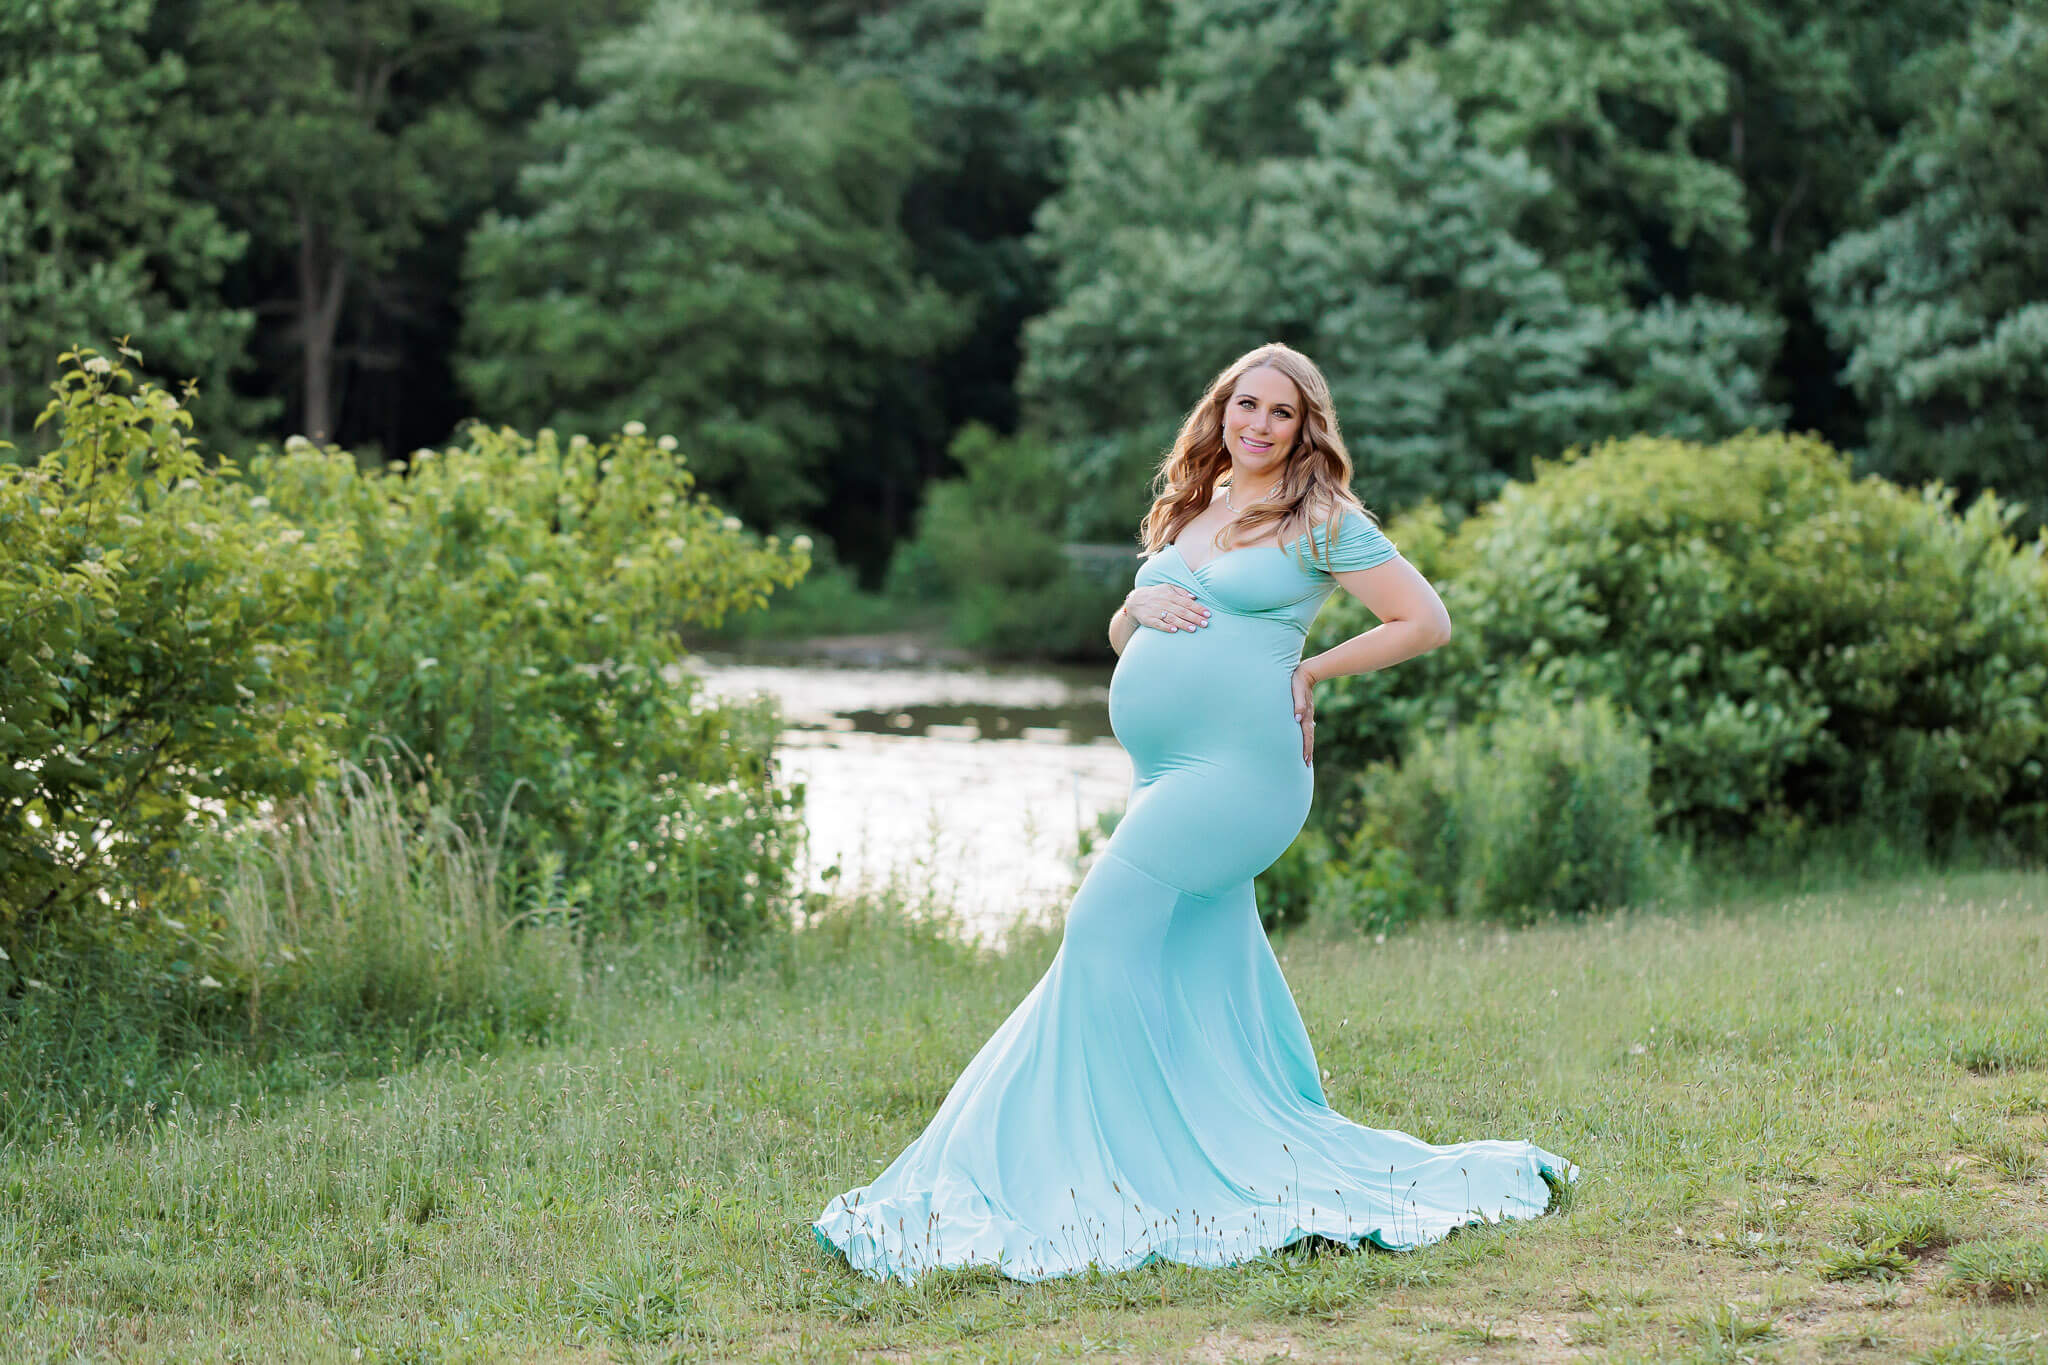 Mother-to-be in a teal dress featured in a blog about Northern Virginia pediatricians.